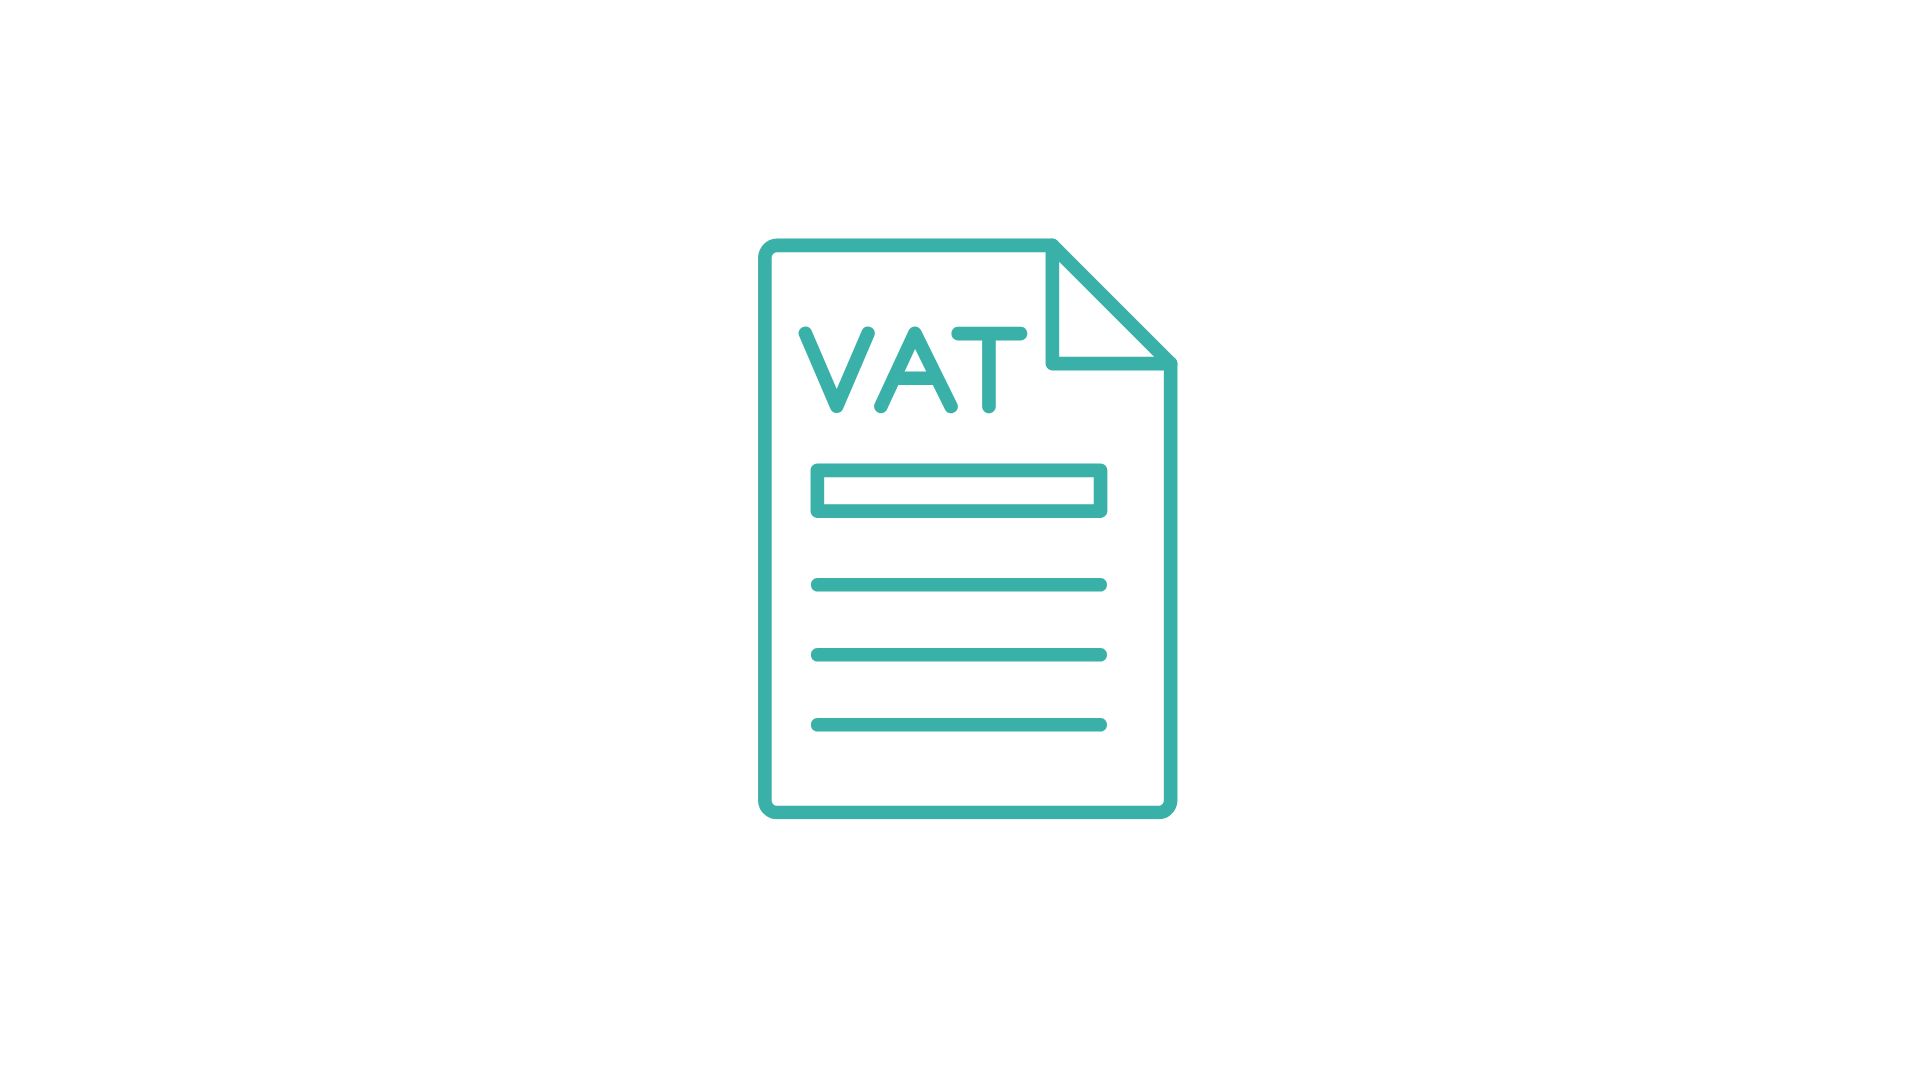 Is it worth being a VAT payer? Benefits and reporting obligations